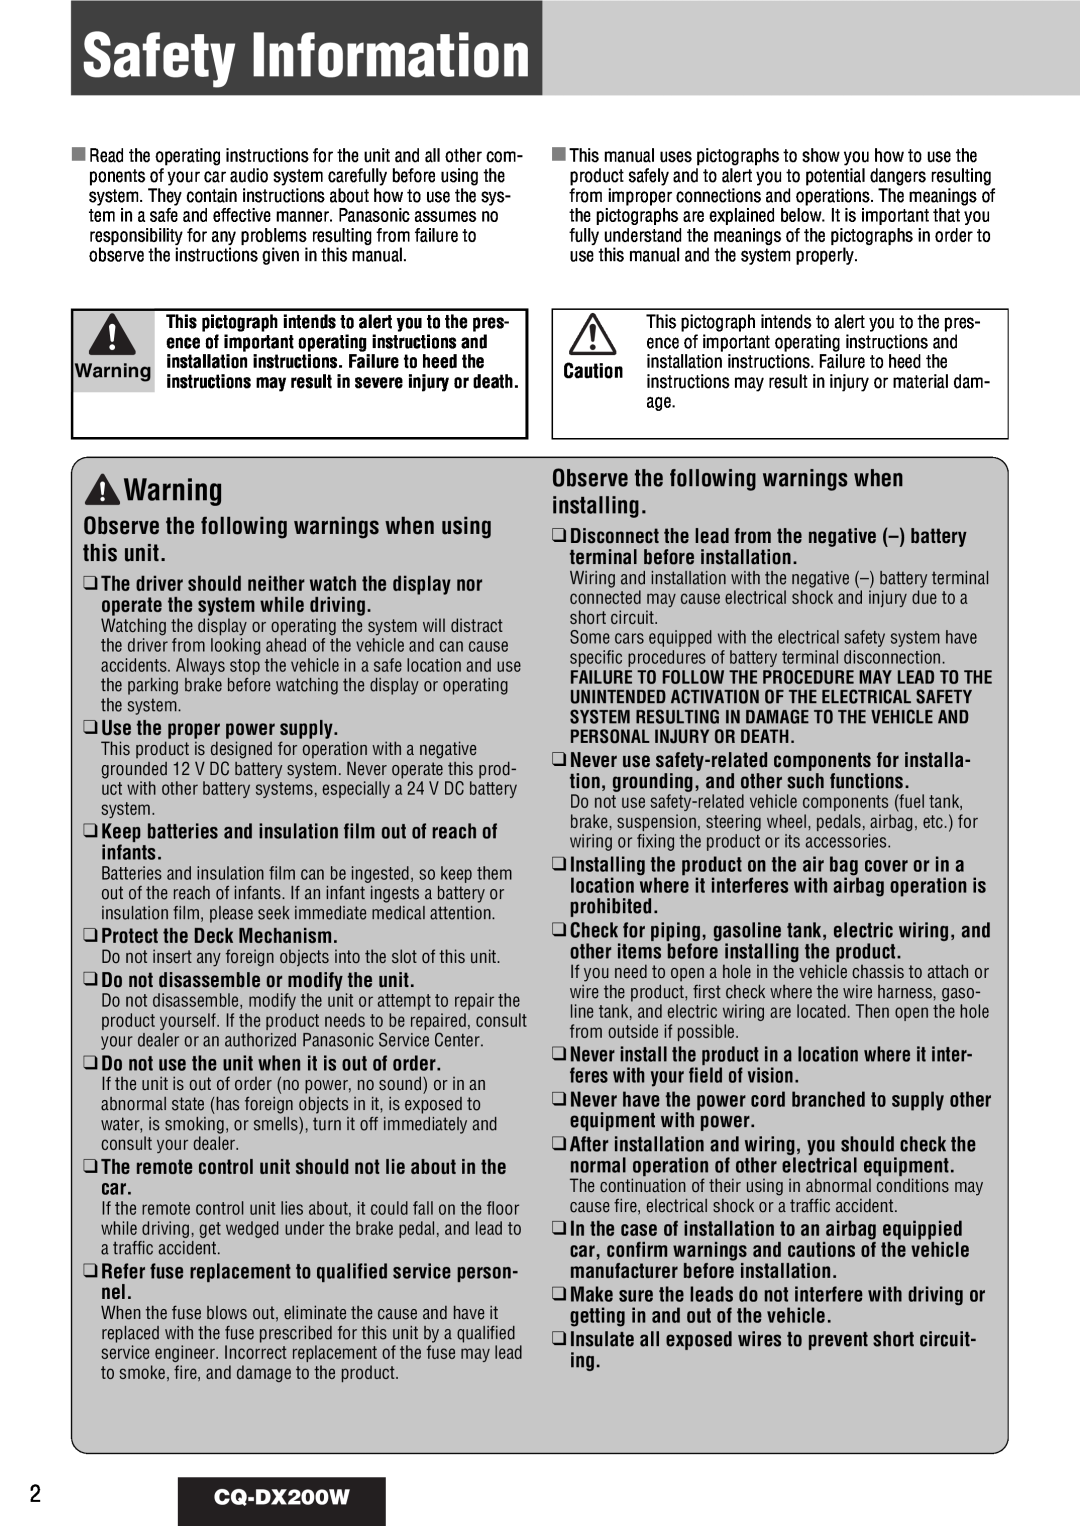 Panasonic CQ-DX200W Safety Information, Observe the following warnings when using this unit, Use the proper power supply 